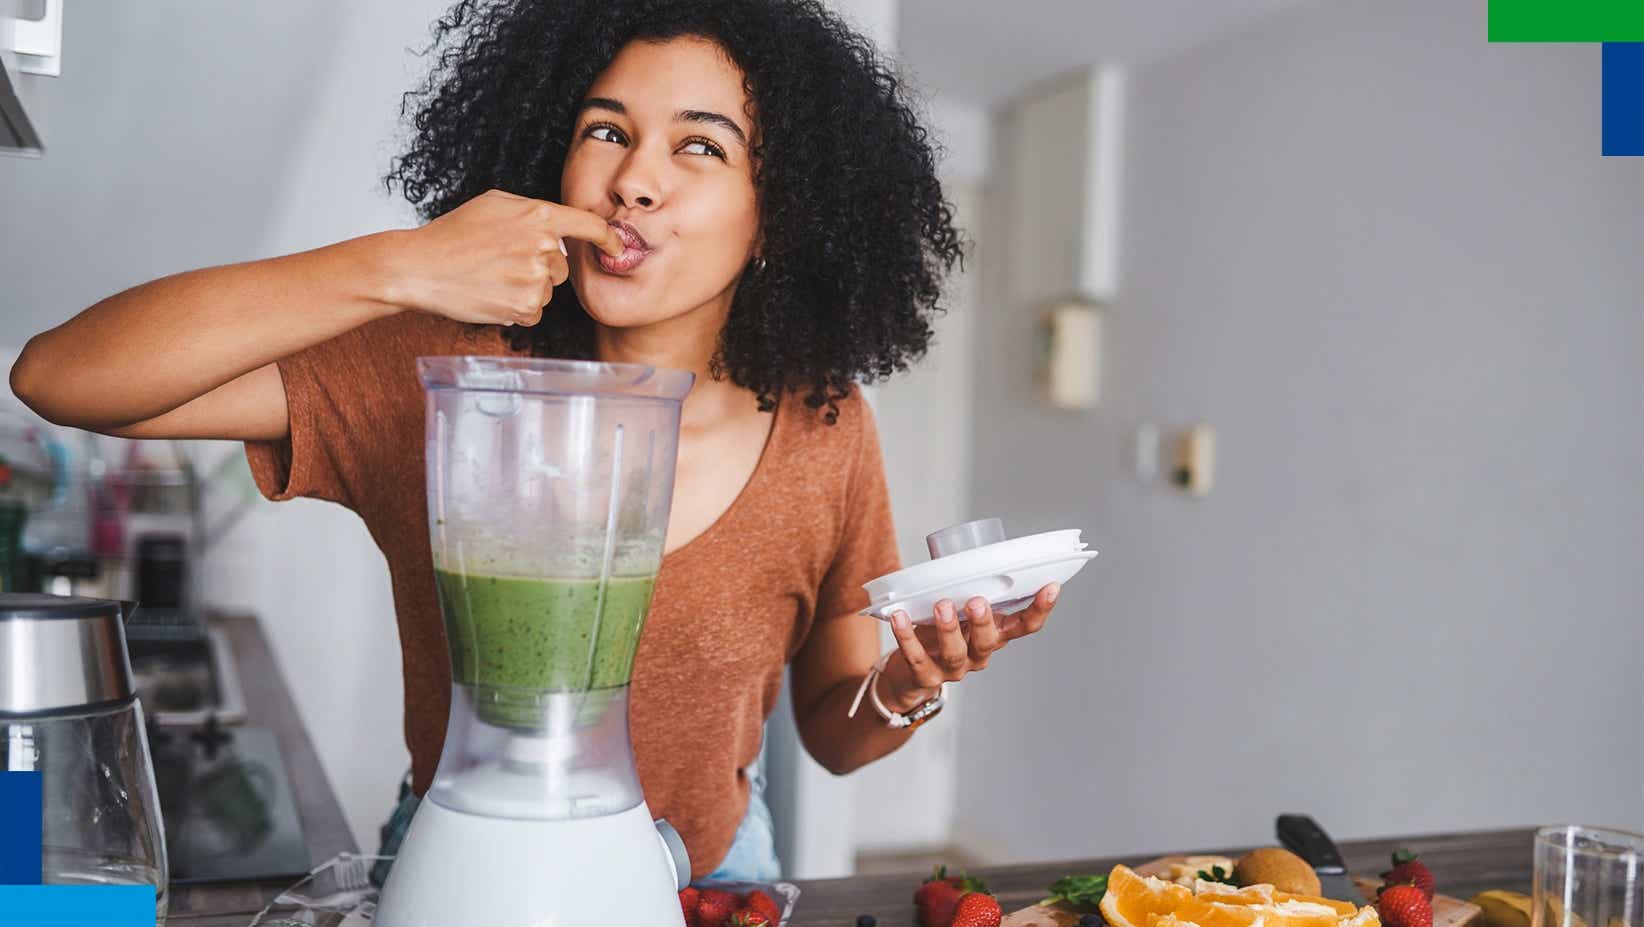 A woman making a smoothie and eating healthy to help her psoriasis